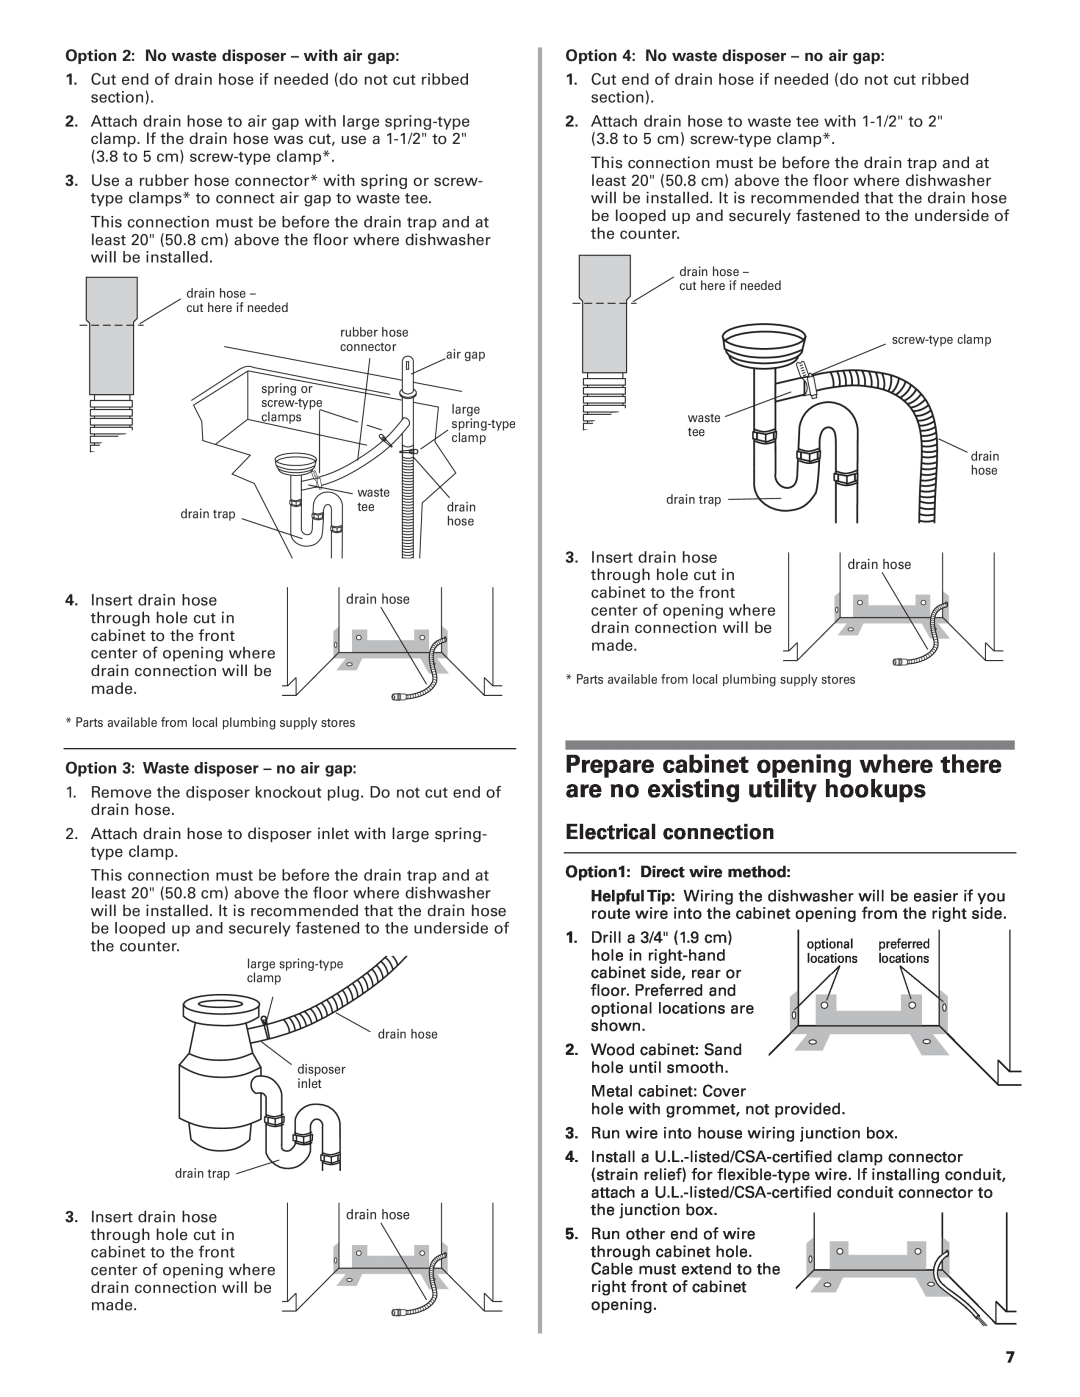 KitchenAid 8573157 Prepare cabinet opening where there are no existing utility hookups, Electrical connection 